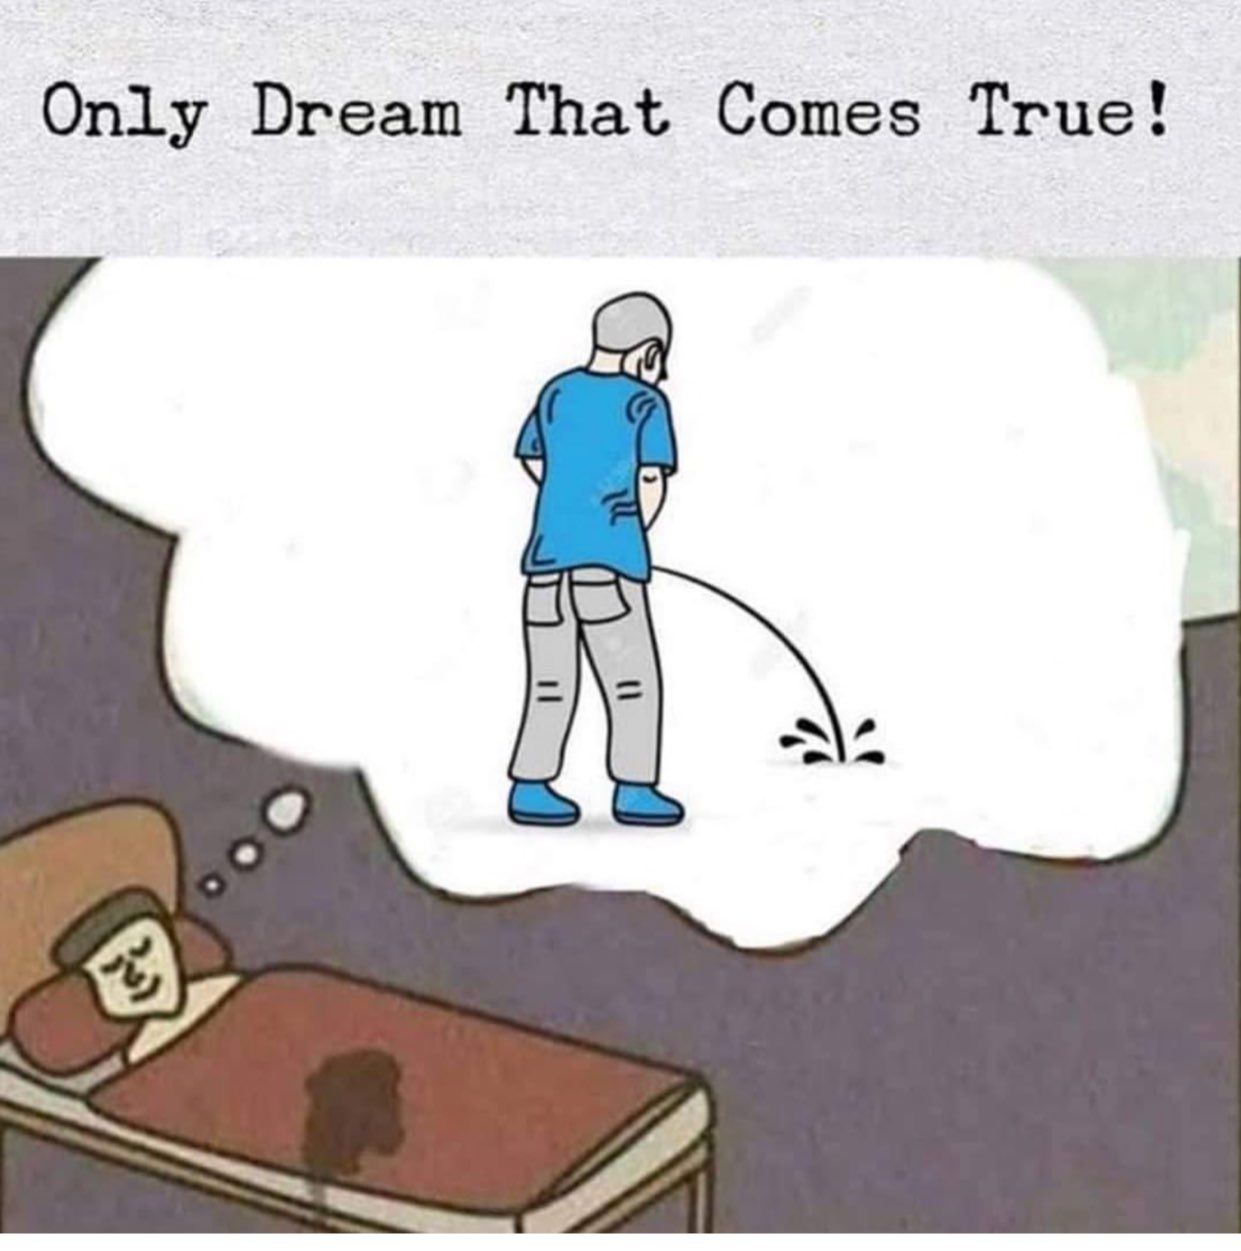 Only dream that comes true